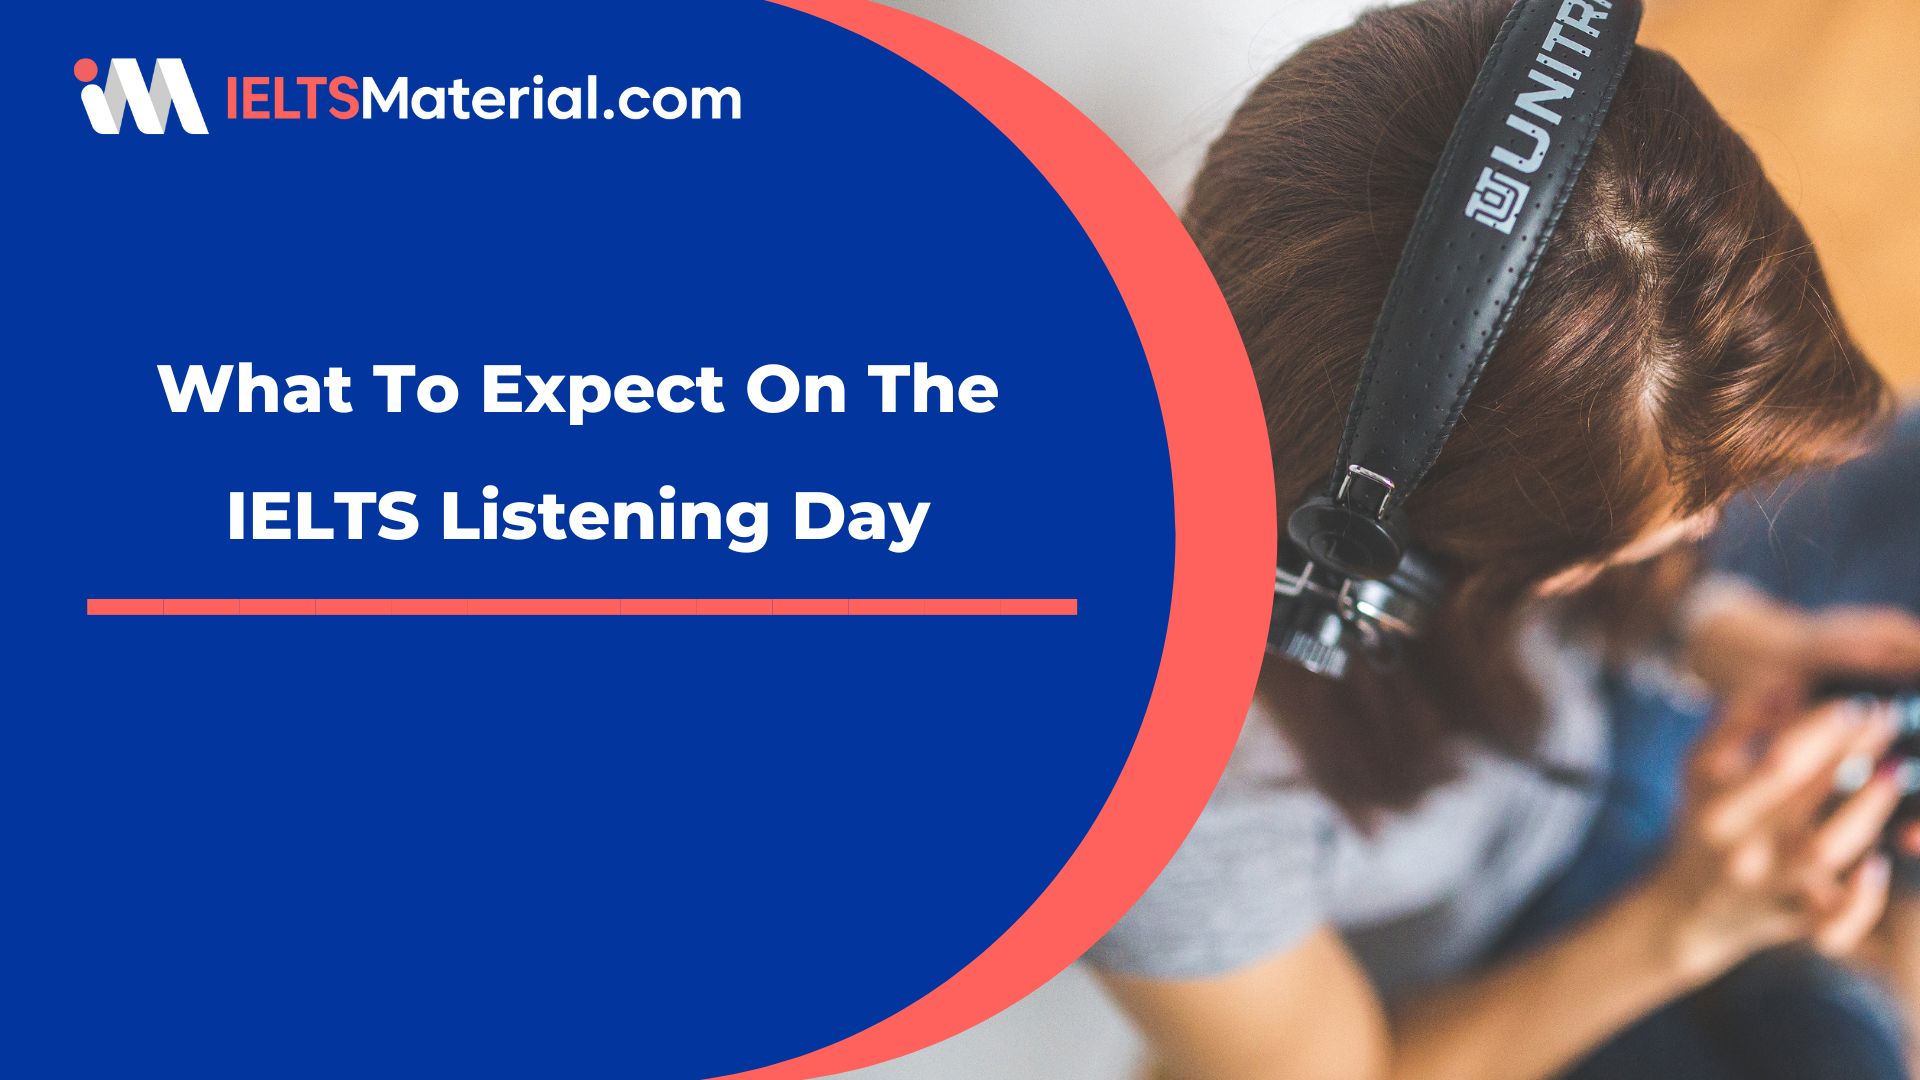 What To Expect On The IELTS Listening Day?